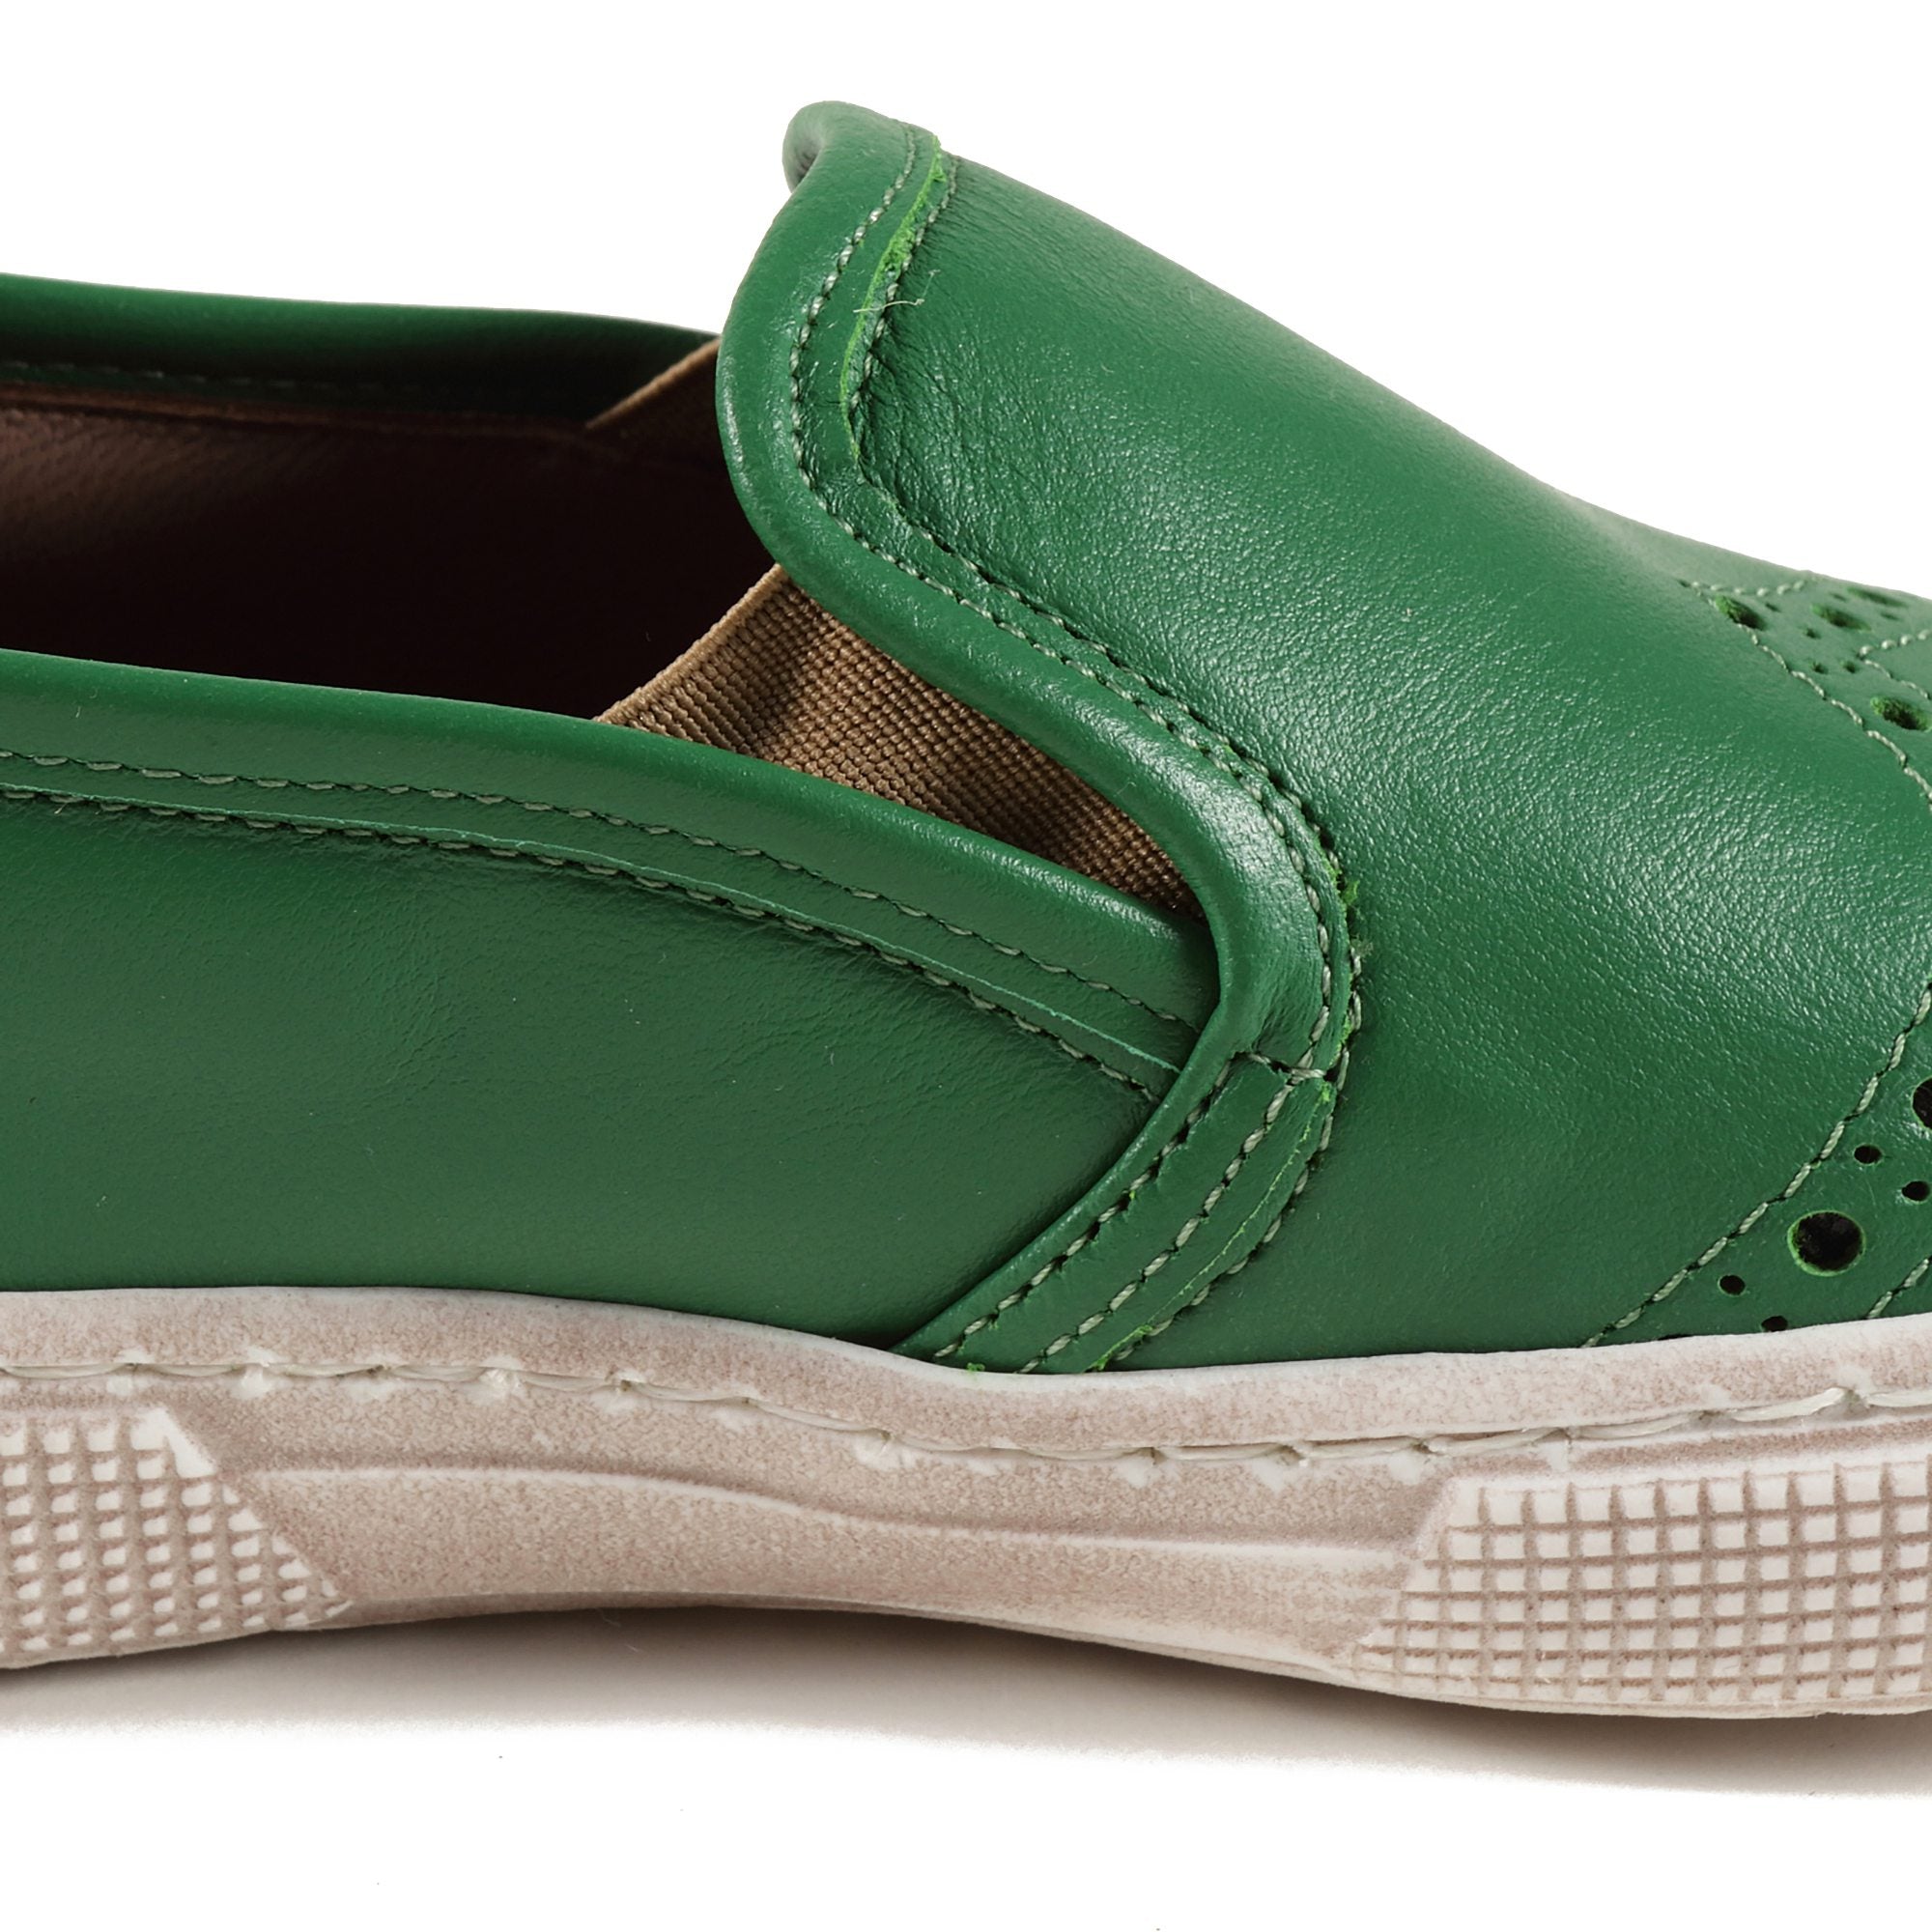 Boys & Girls Green Leather Shoes